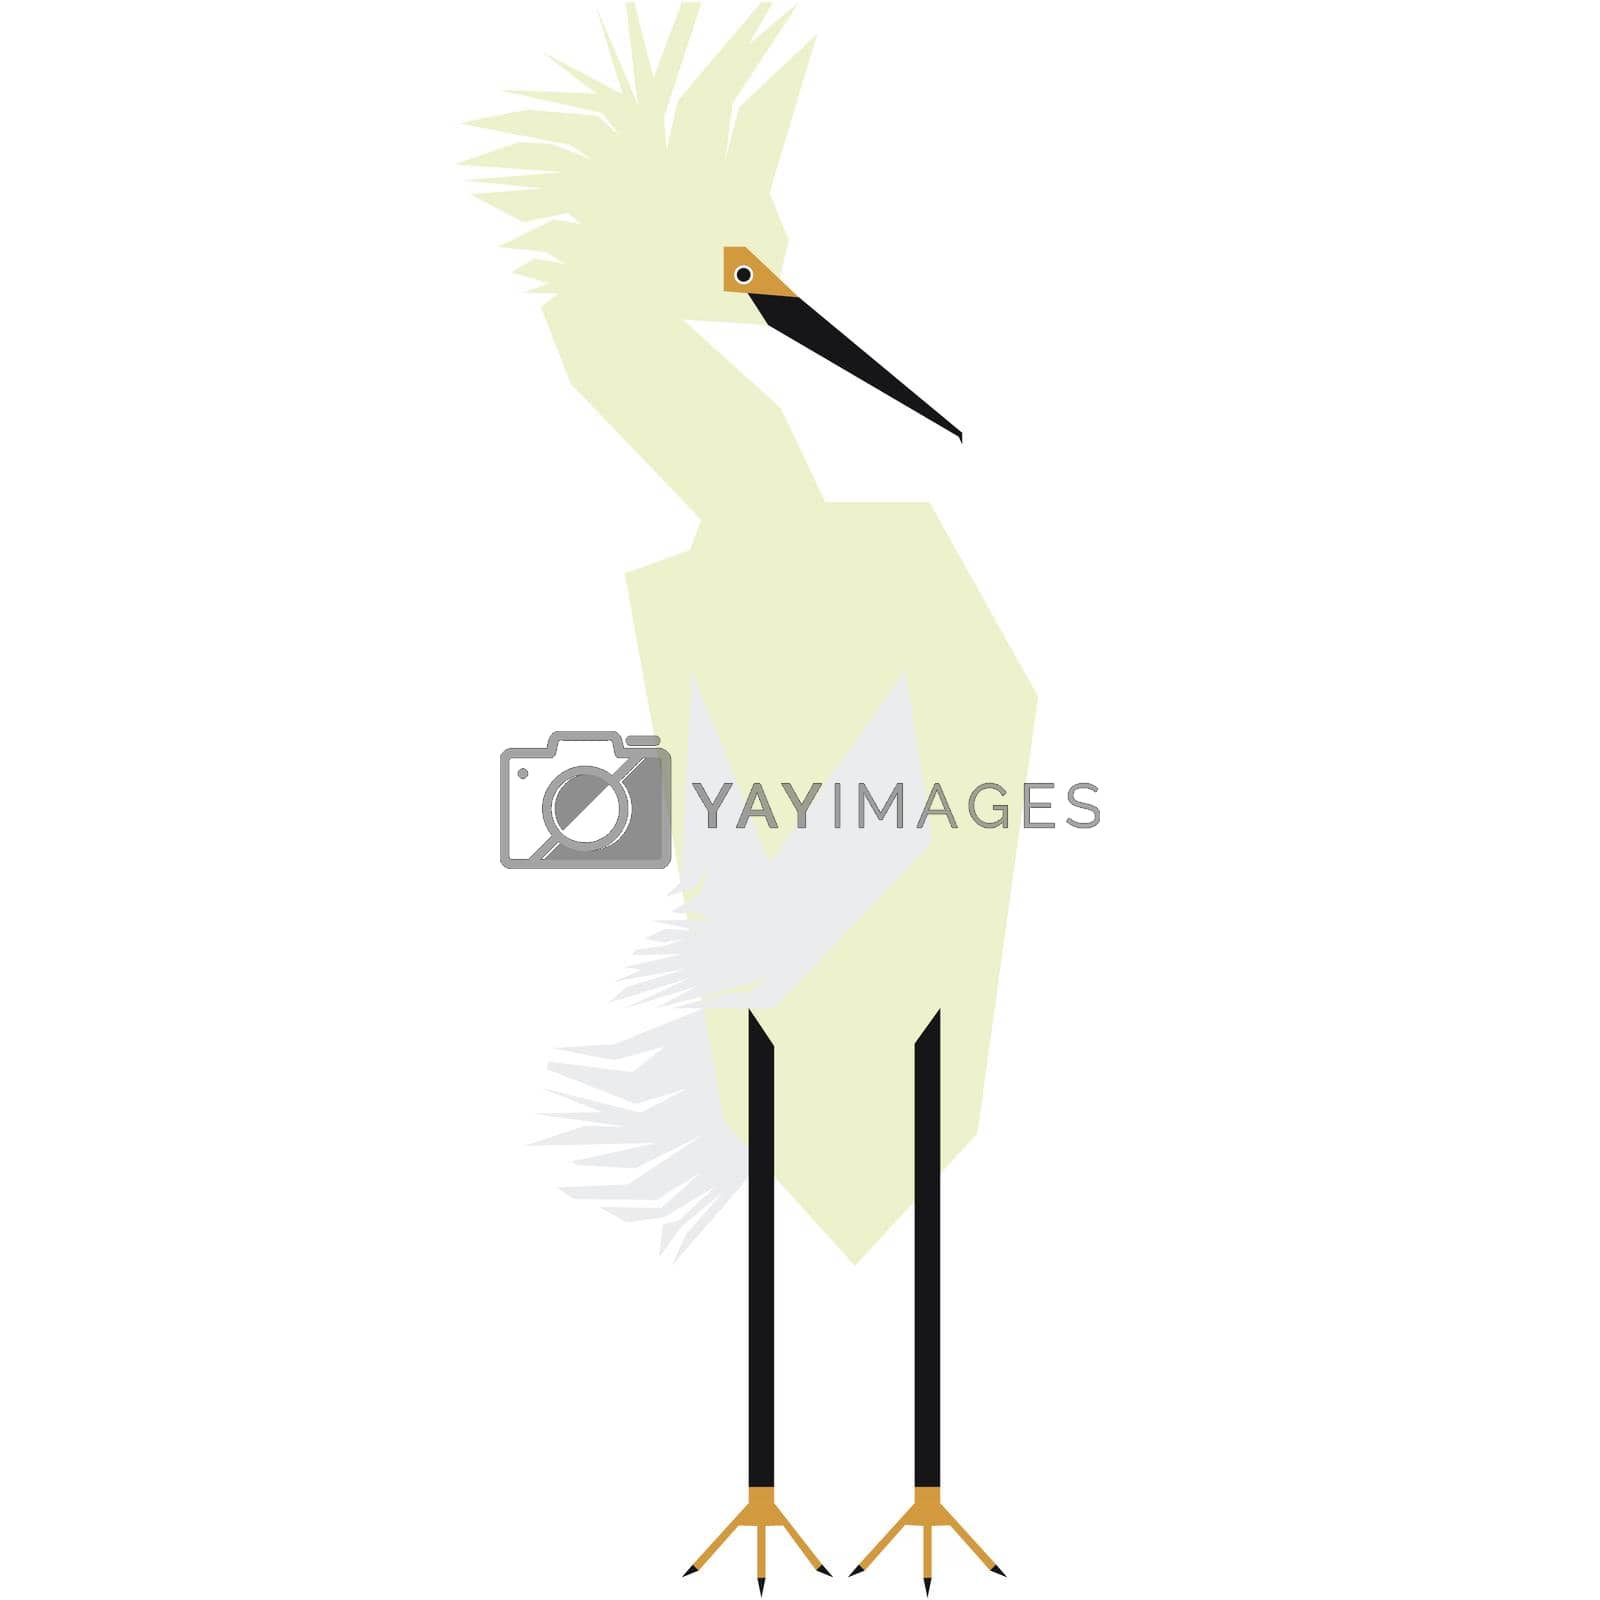 Royalty free image of Colorful minimalistic illustration of a species of bird. by diantimony